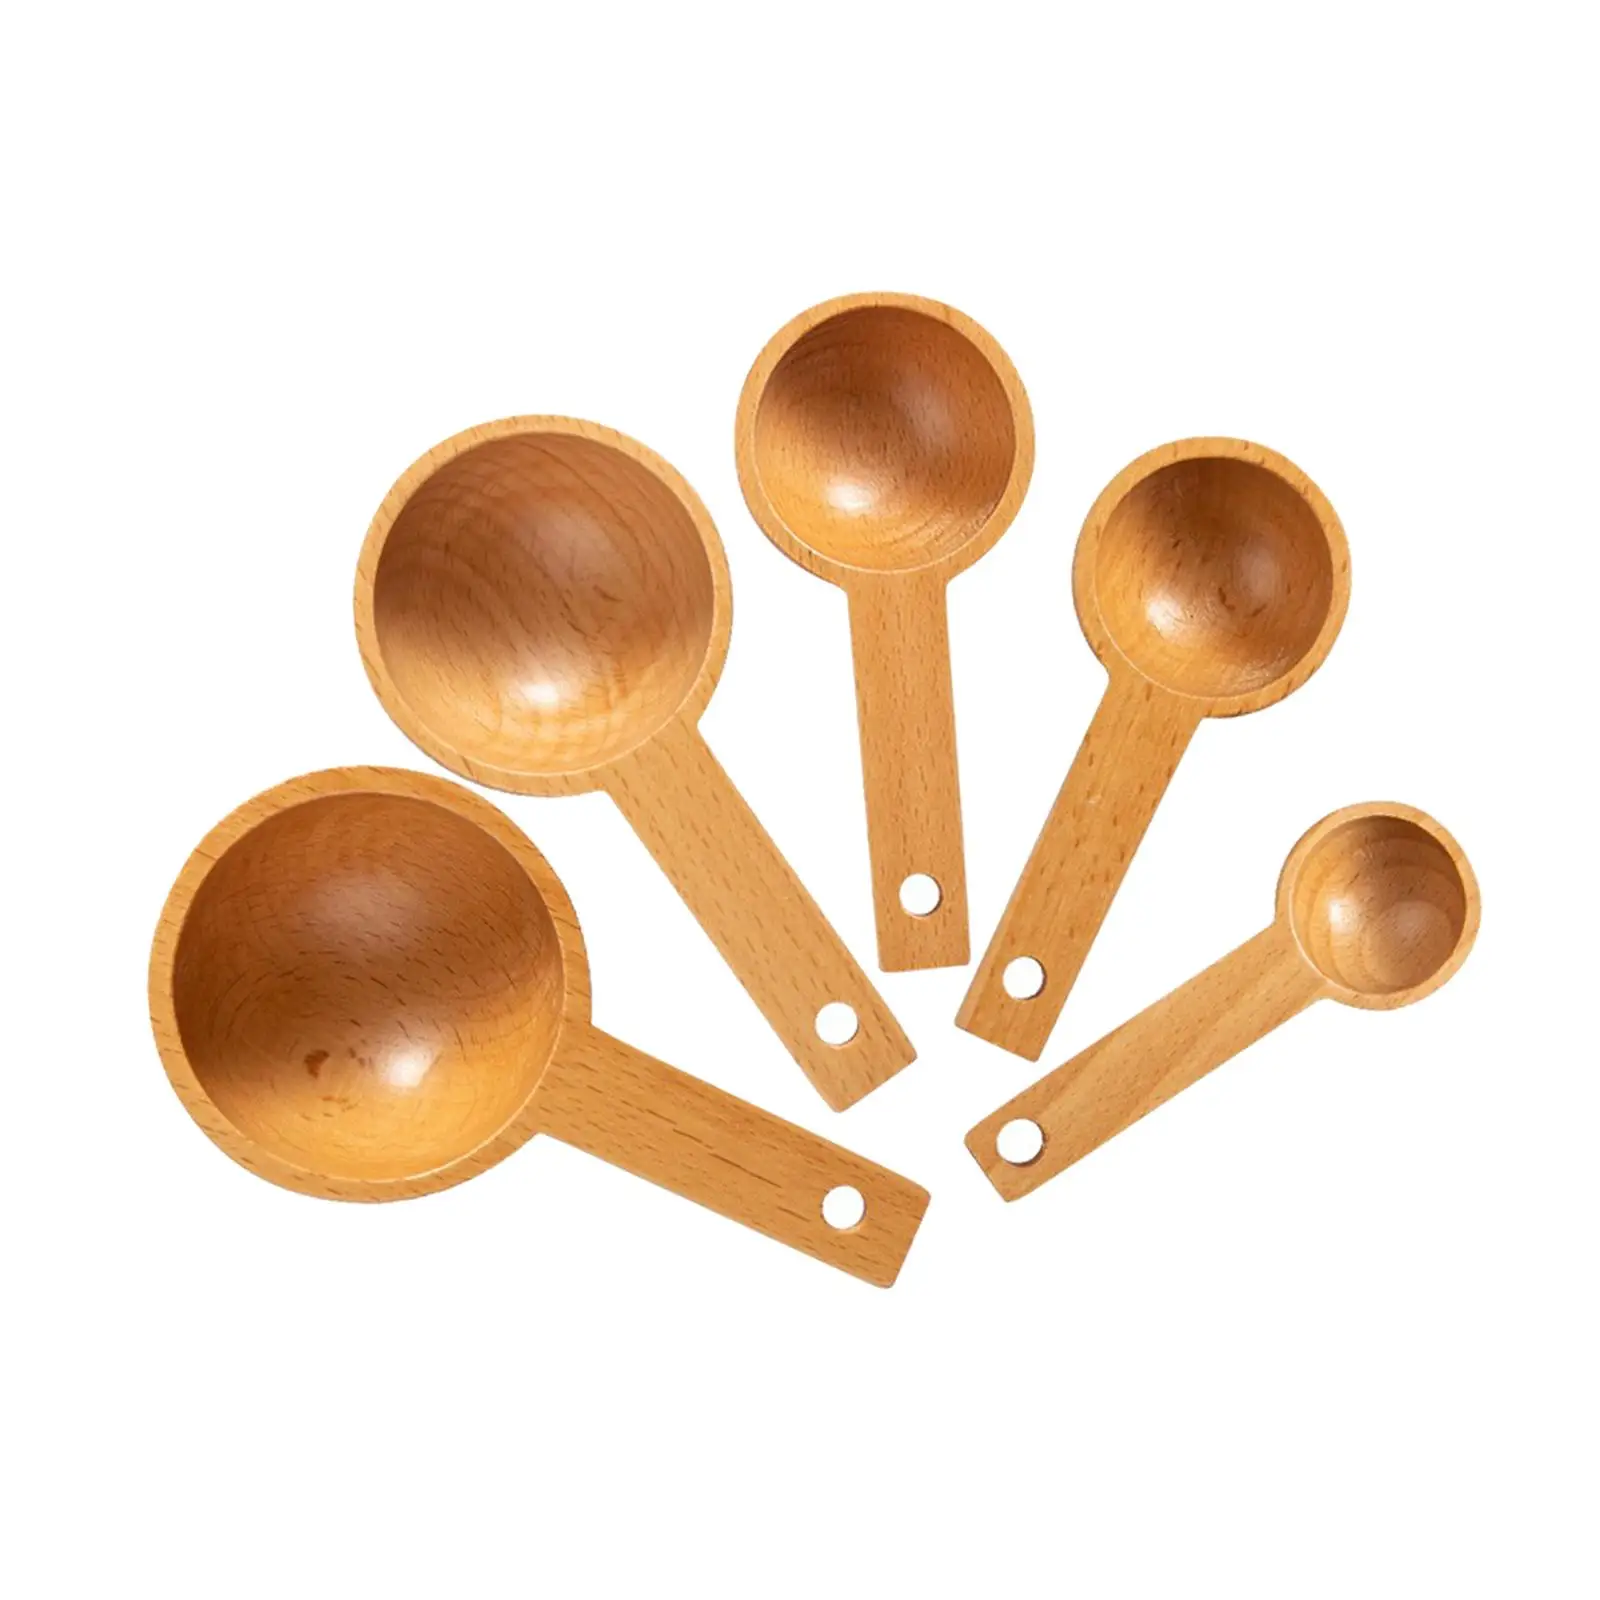 Set of 5 Wood Measuring Spoons Gadgets for Dining Dry Liquid Food Cooking